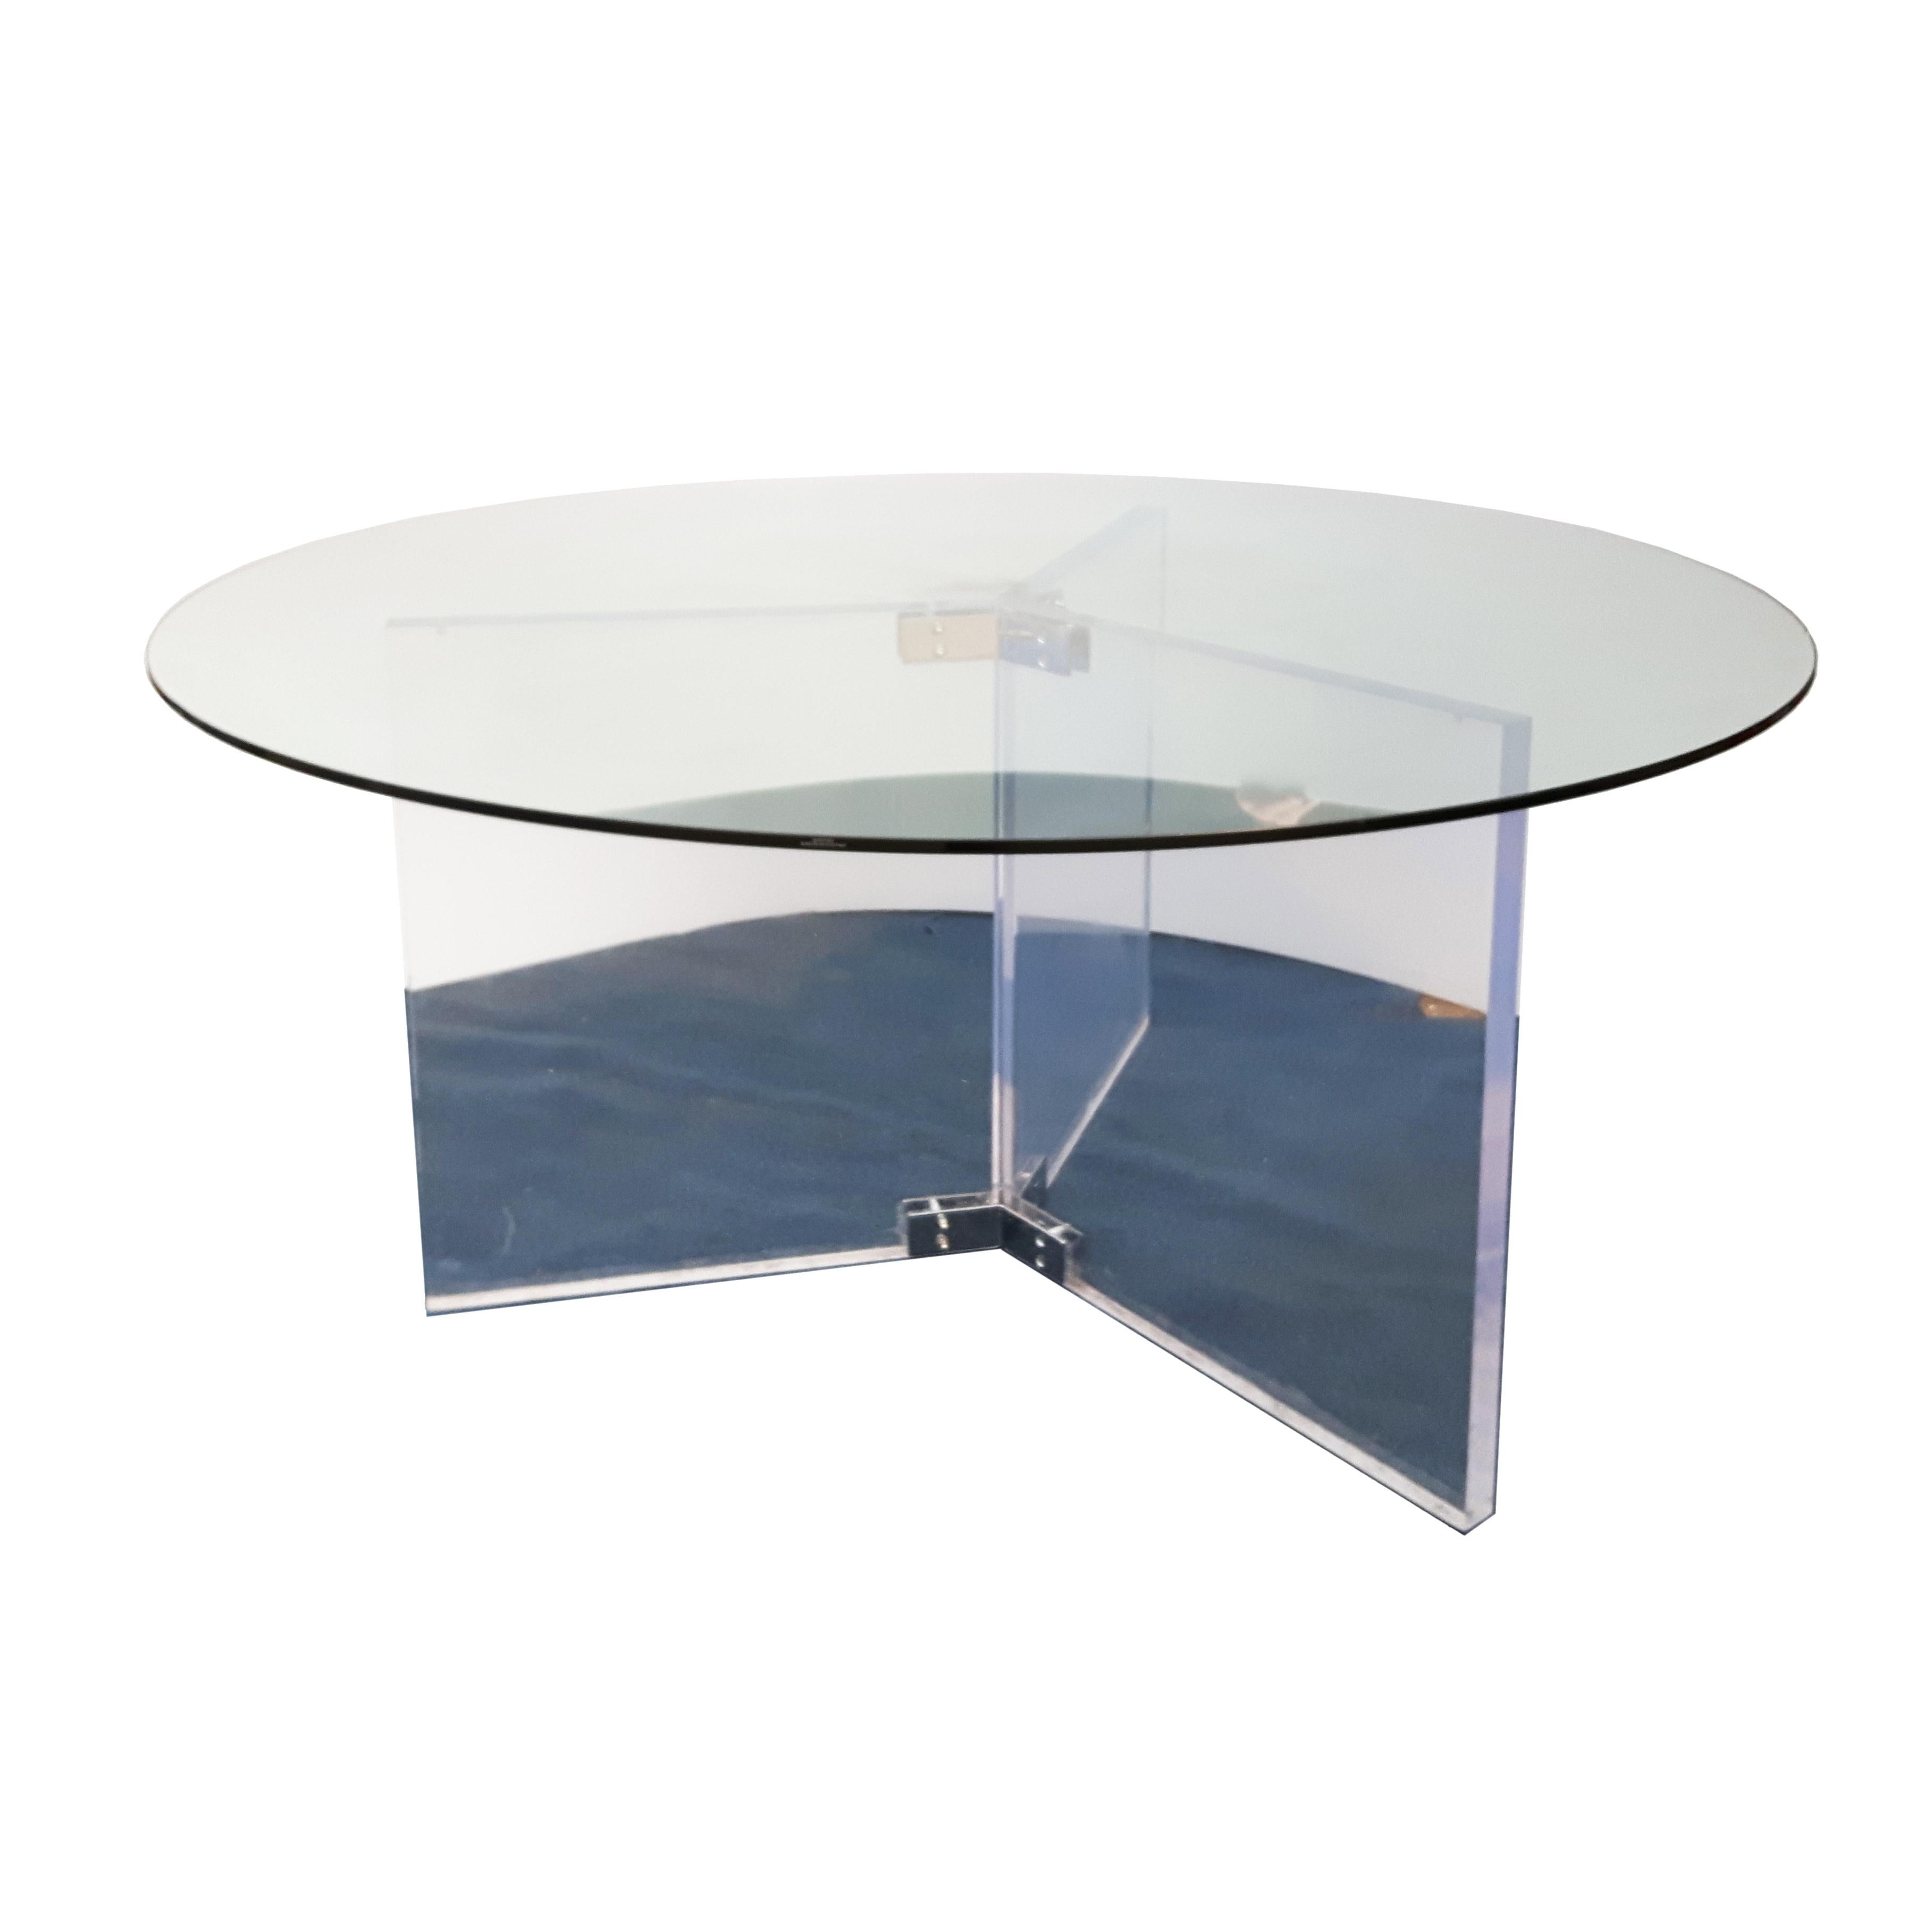 A very large custom-made circular dining table (or commercial display centre table), in the manner of Jacques Dumond. The base is formed by Y-shaped thick lucite panels and chrome fittings, which support the big and heavy round glass top. Originally